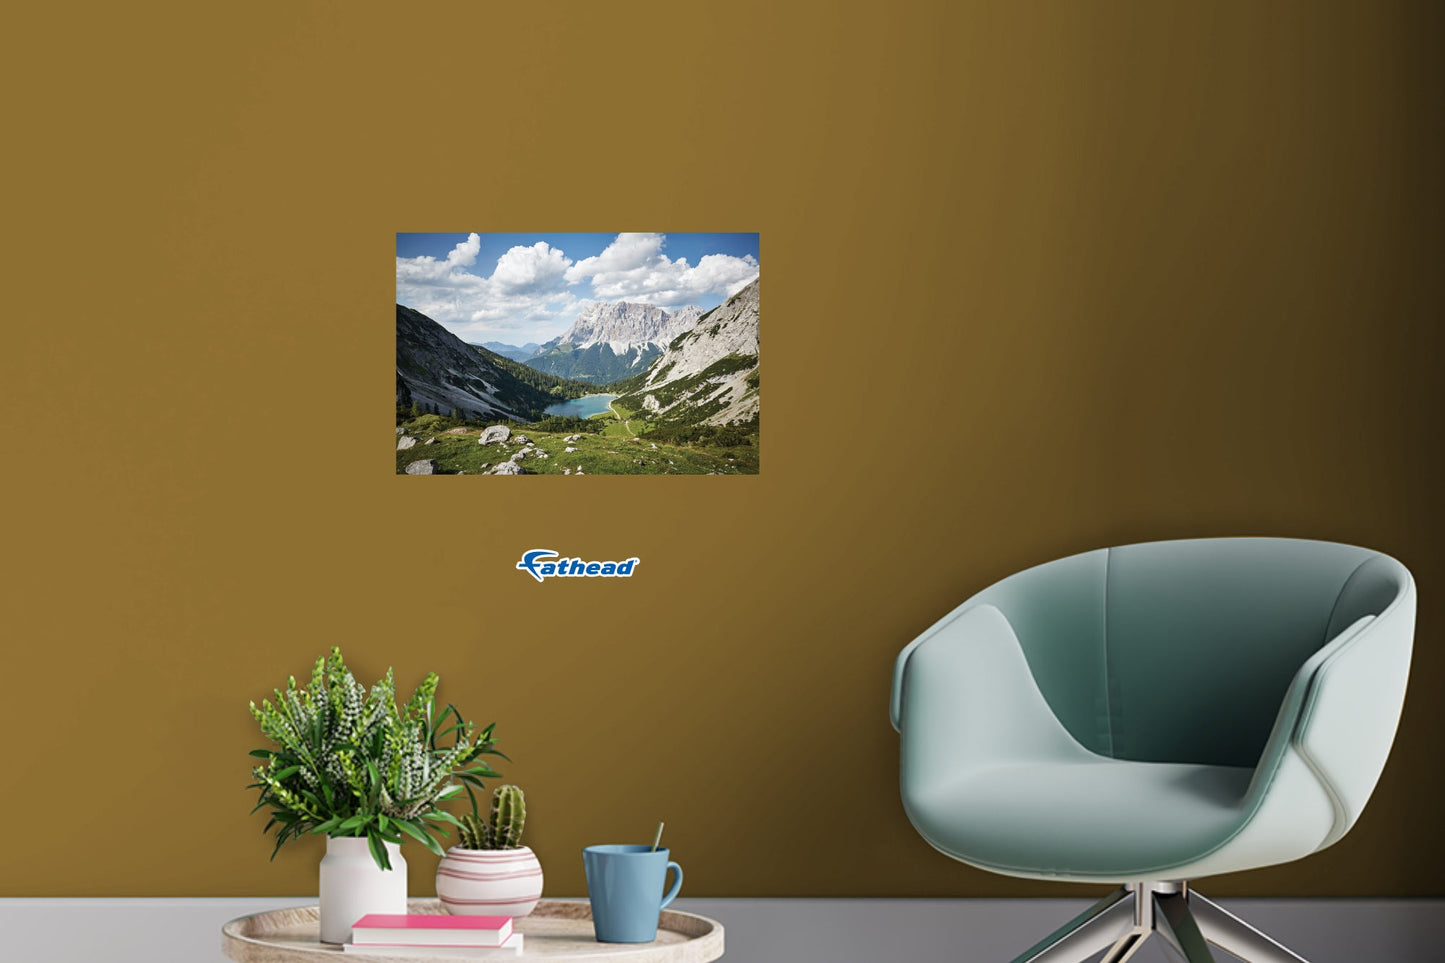 Generic Scenery: Above Poster - Removable Adhesive Decal